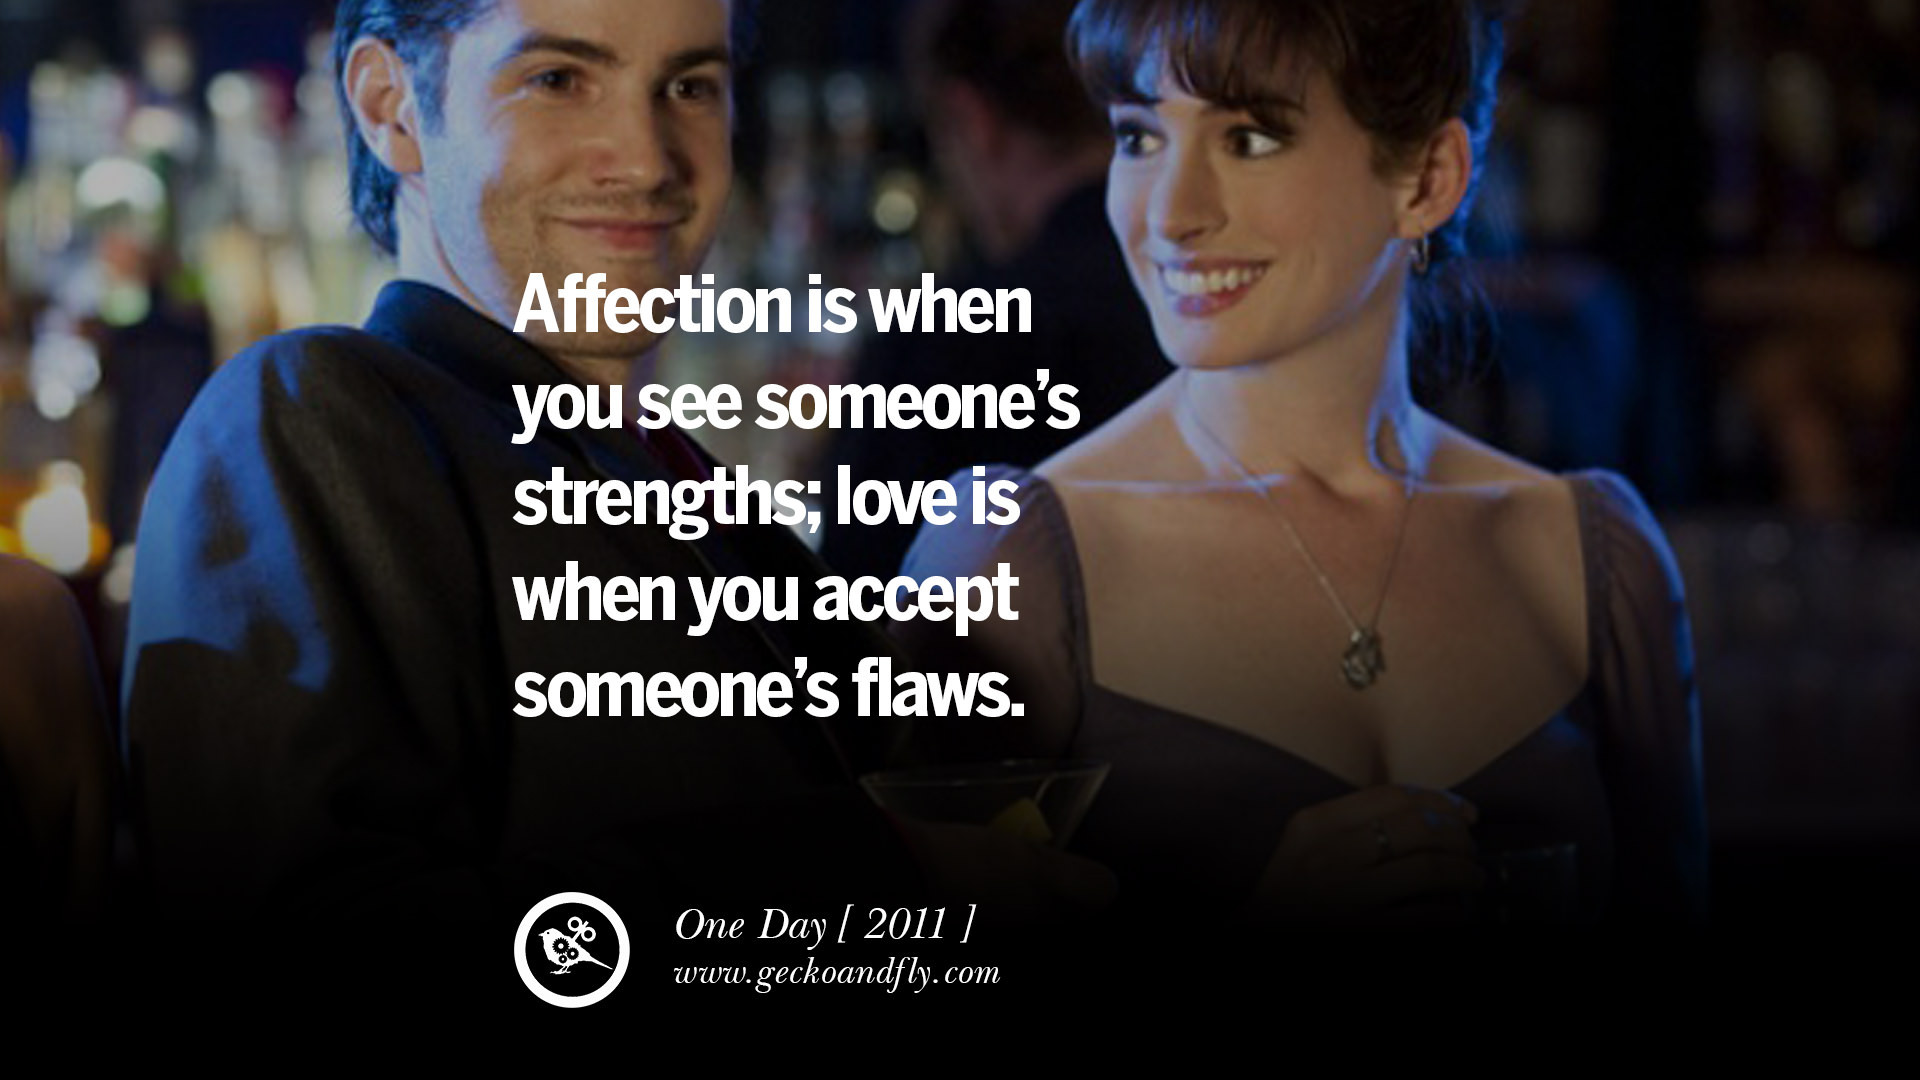 Funny Movie Quotes About Love
 20 Famous Movie Quotes on Love Life Relationship